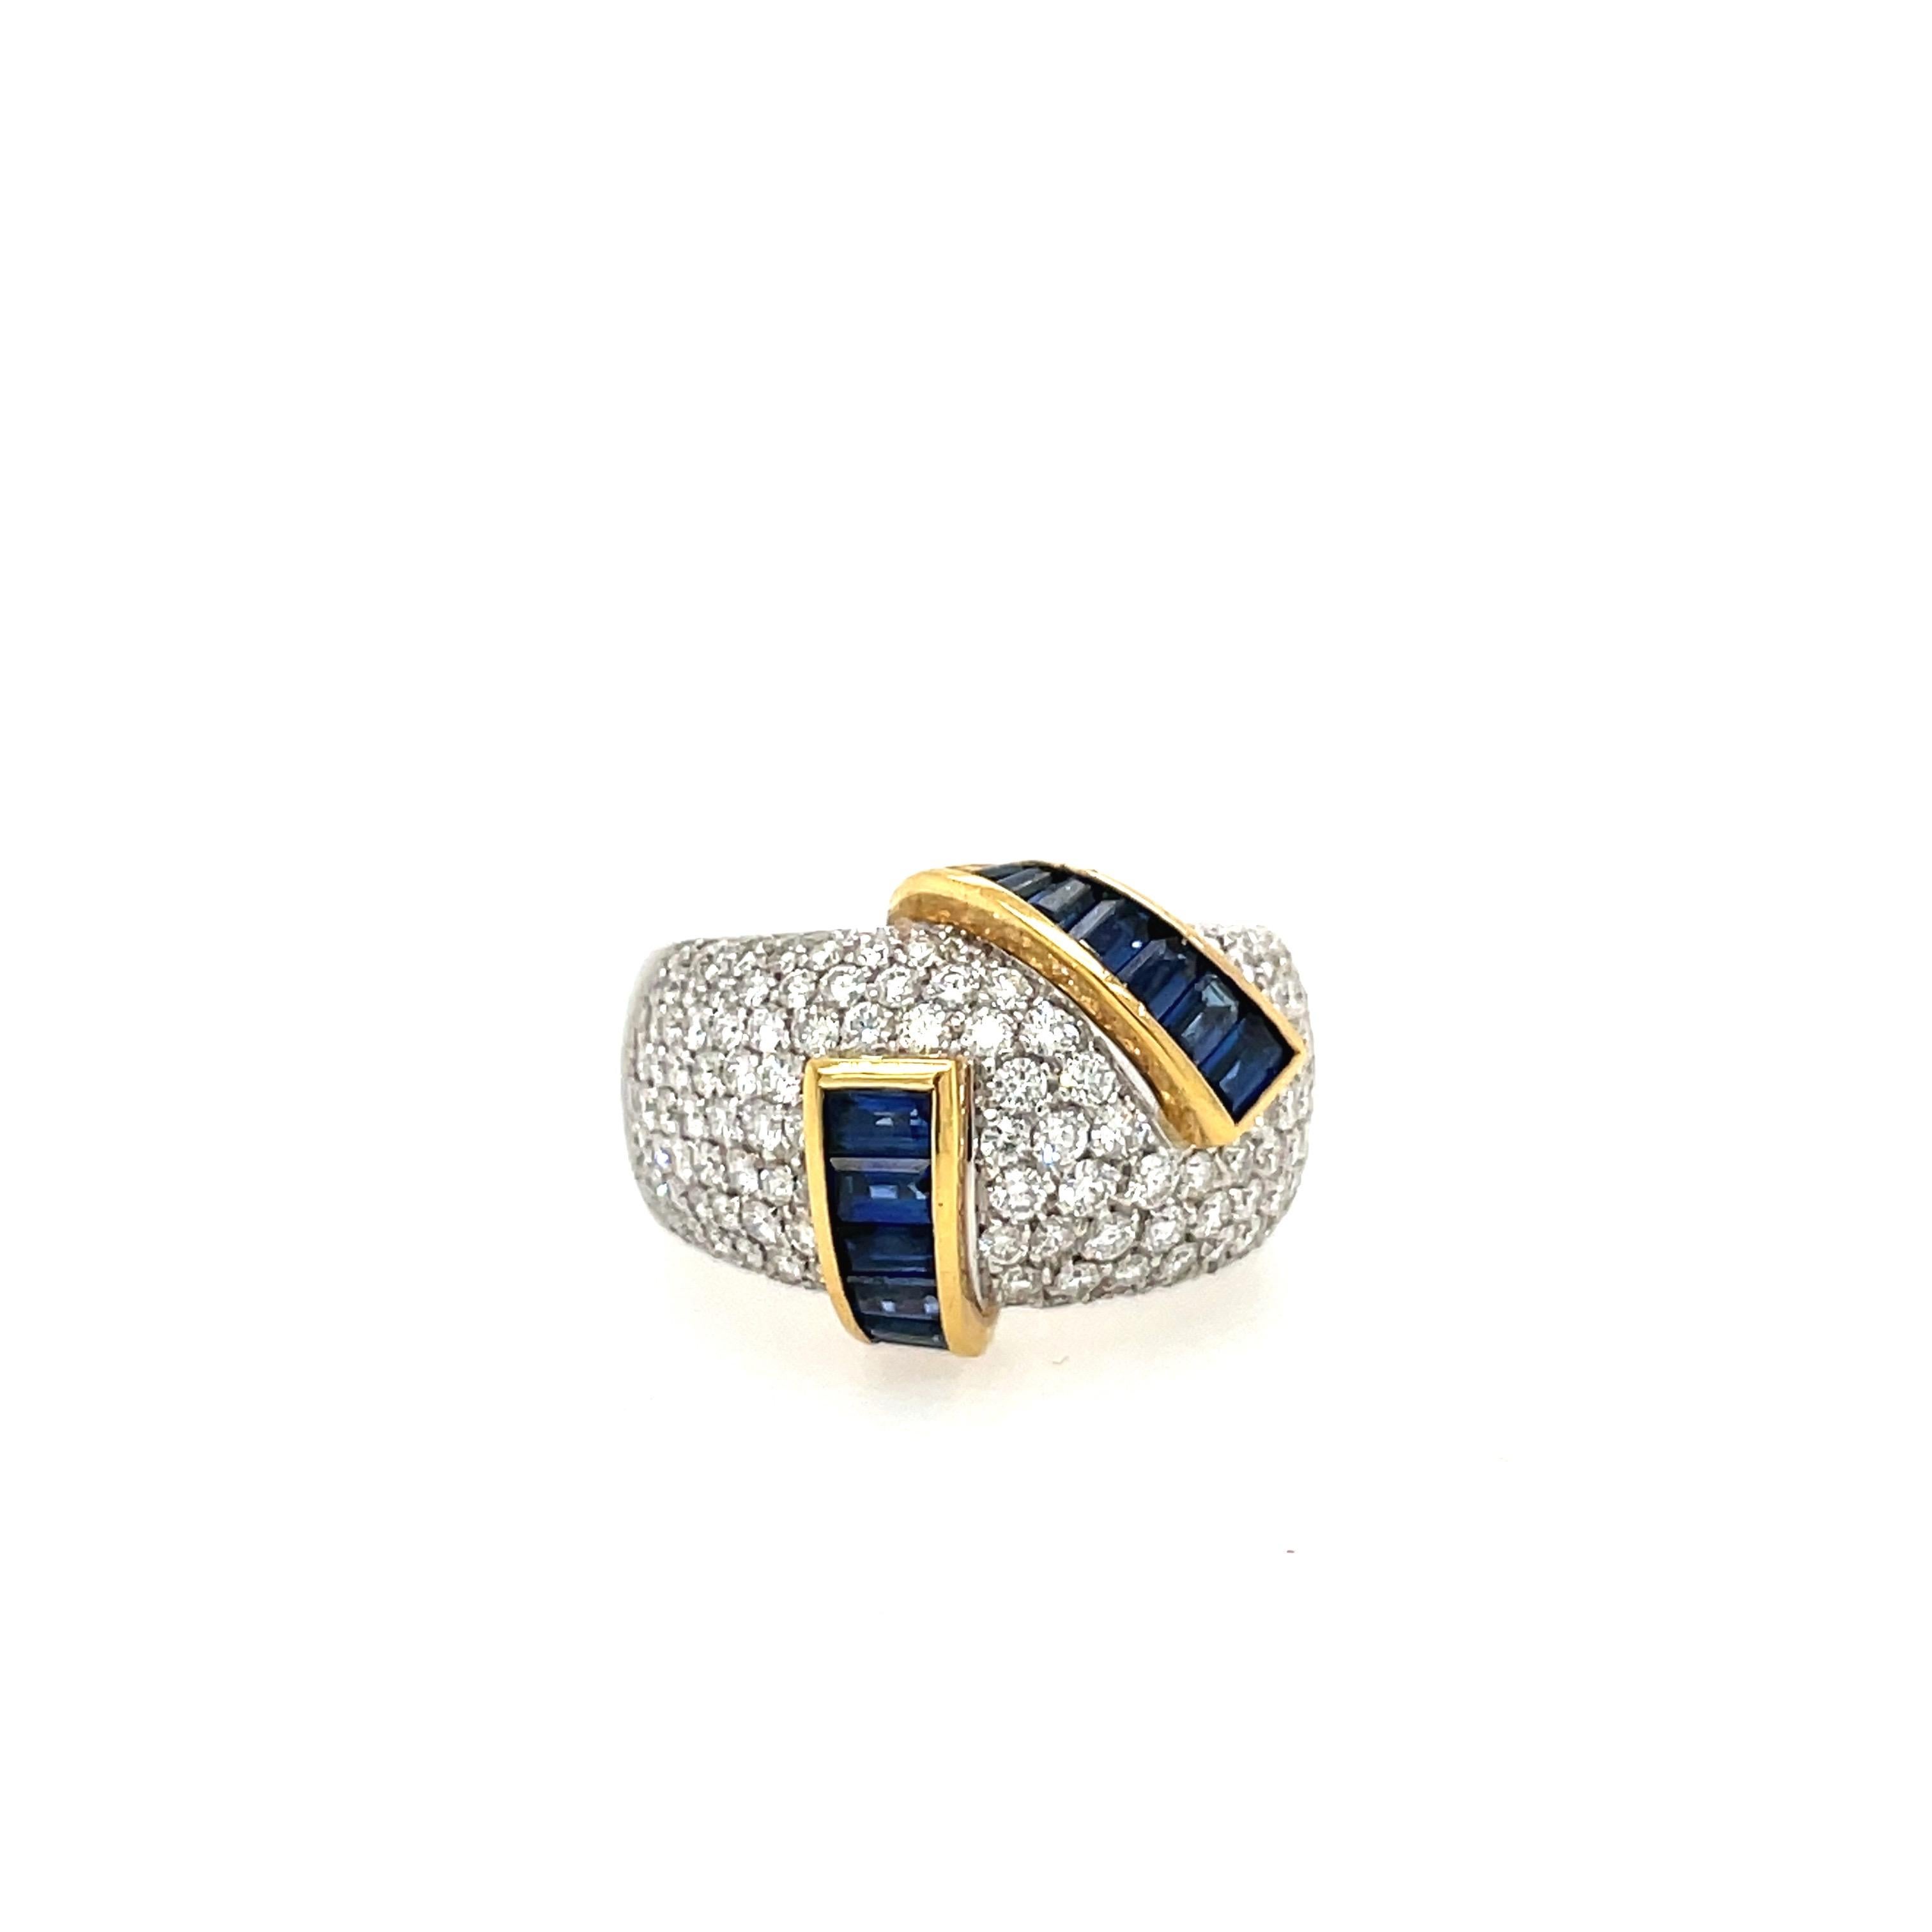 Round Cut Alfiere & St. John 18KT Gold, Diamond 1.99 Carat and Blue Sapphire 2.15Ct. Ring For Sale